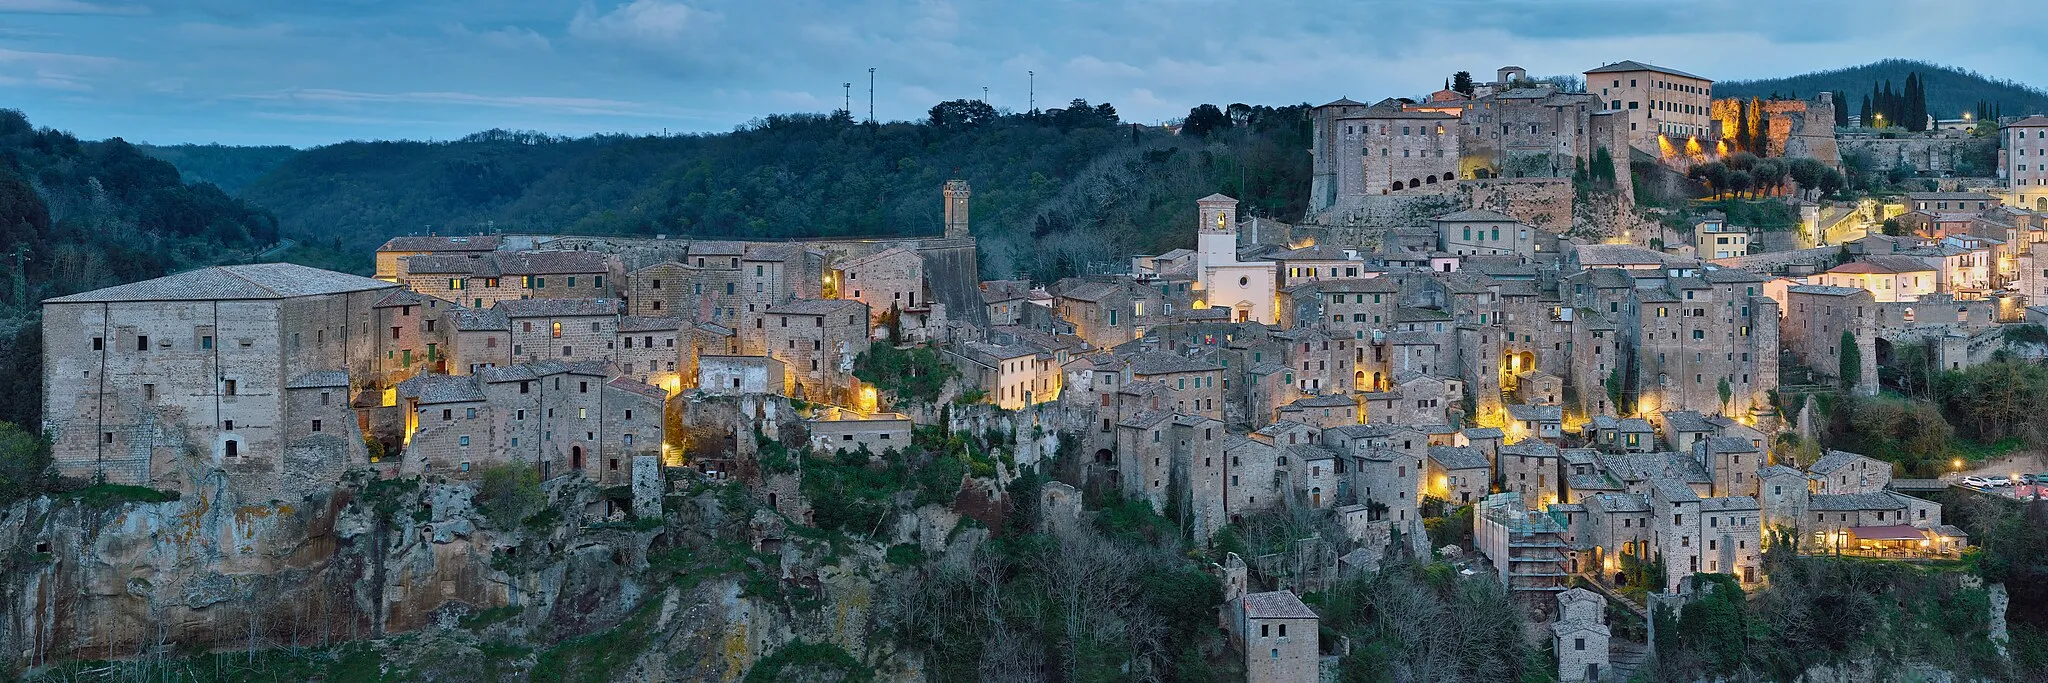 Photo showing: View towards Sorano - taken from San Rocco viewpoint (W of Sorano) during blue hour